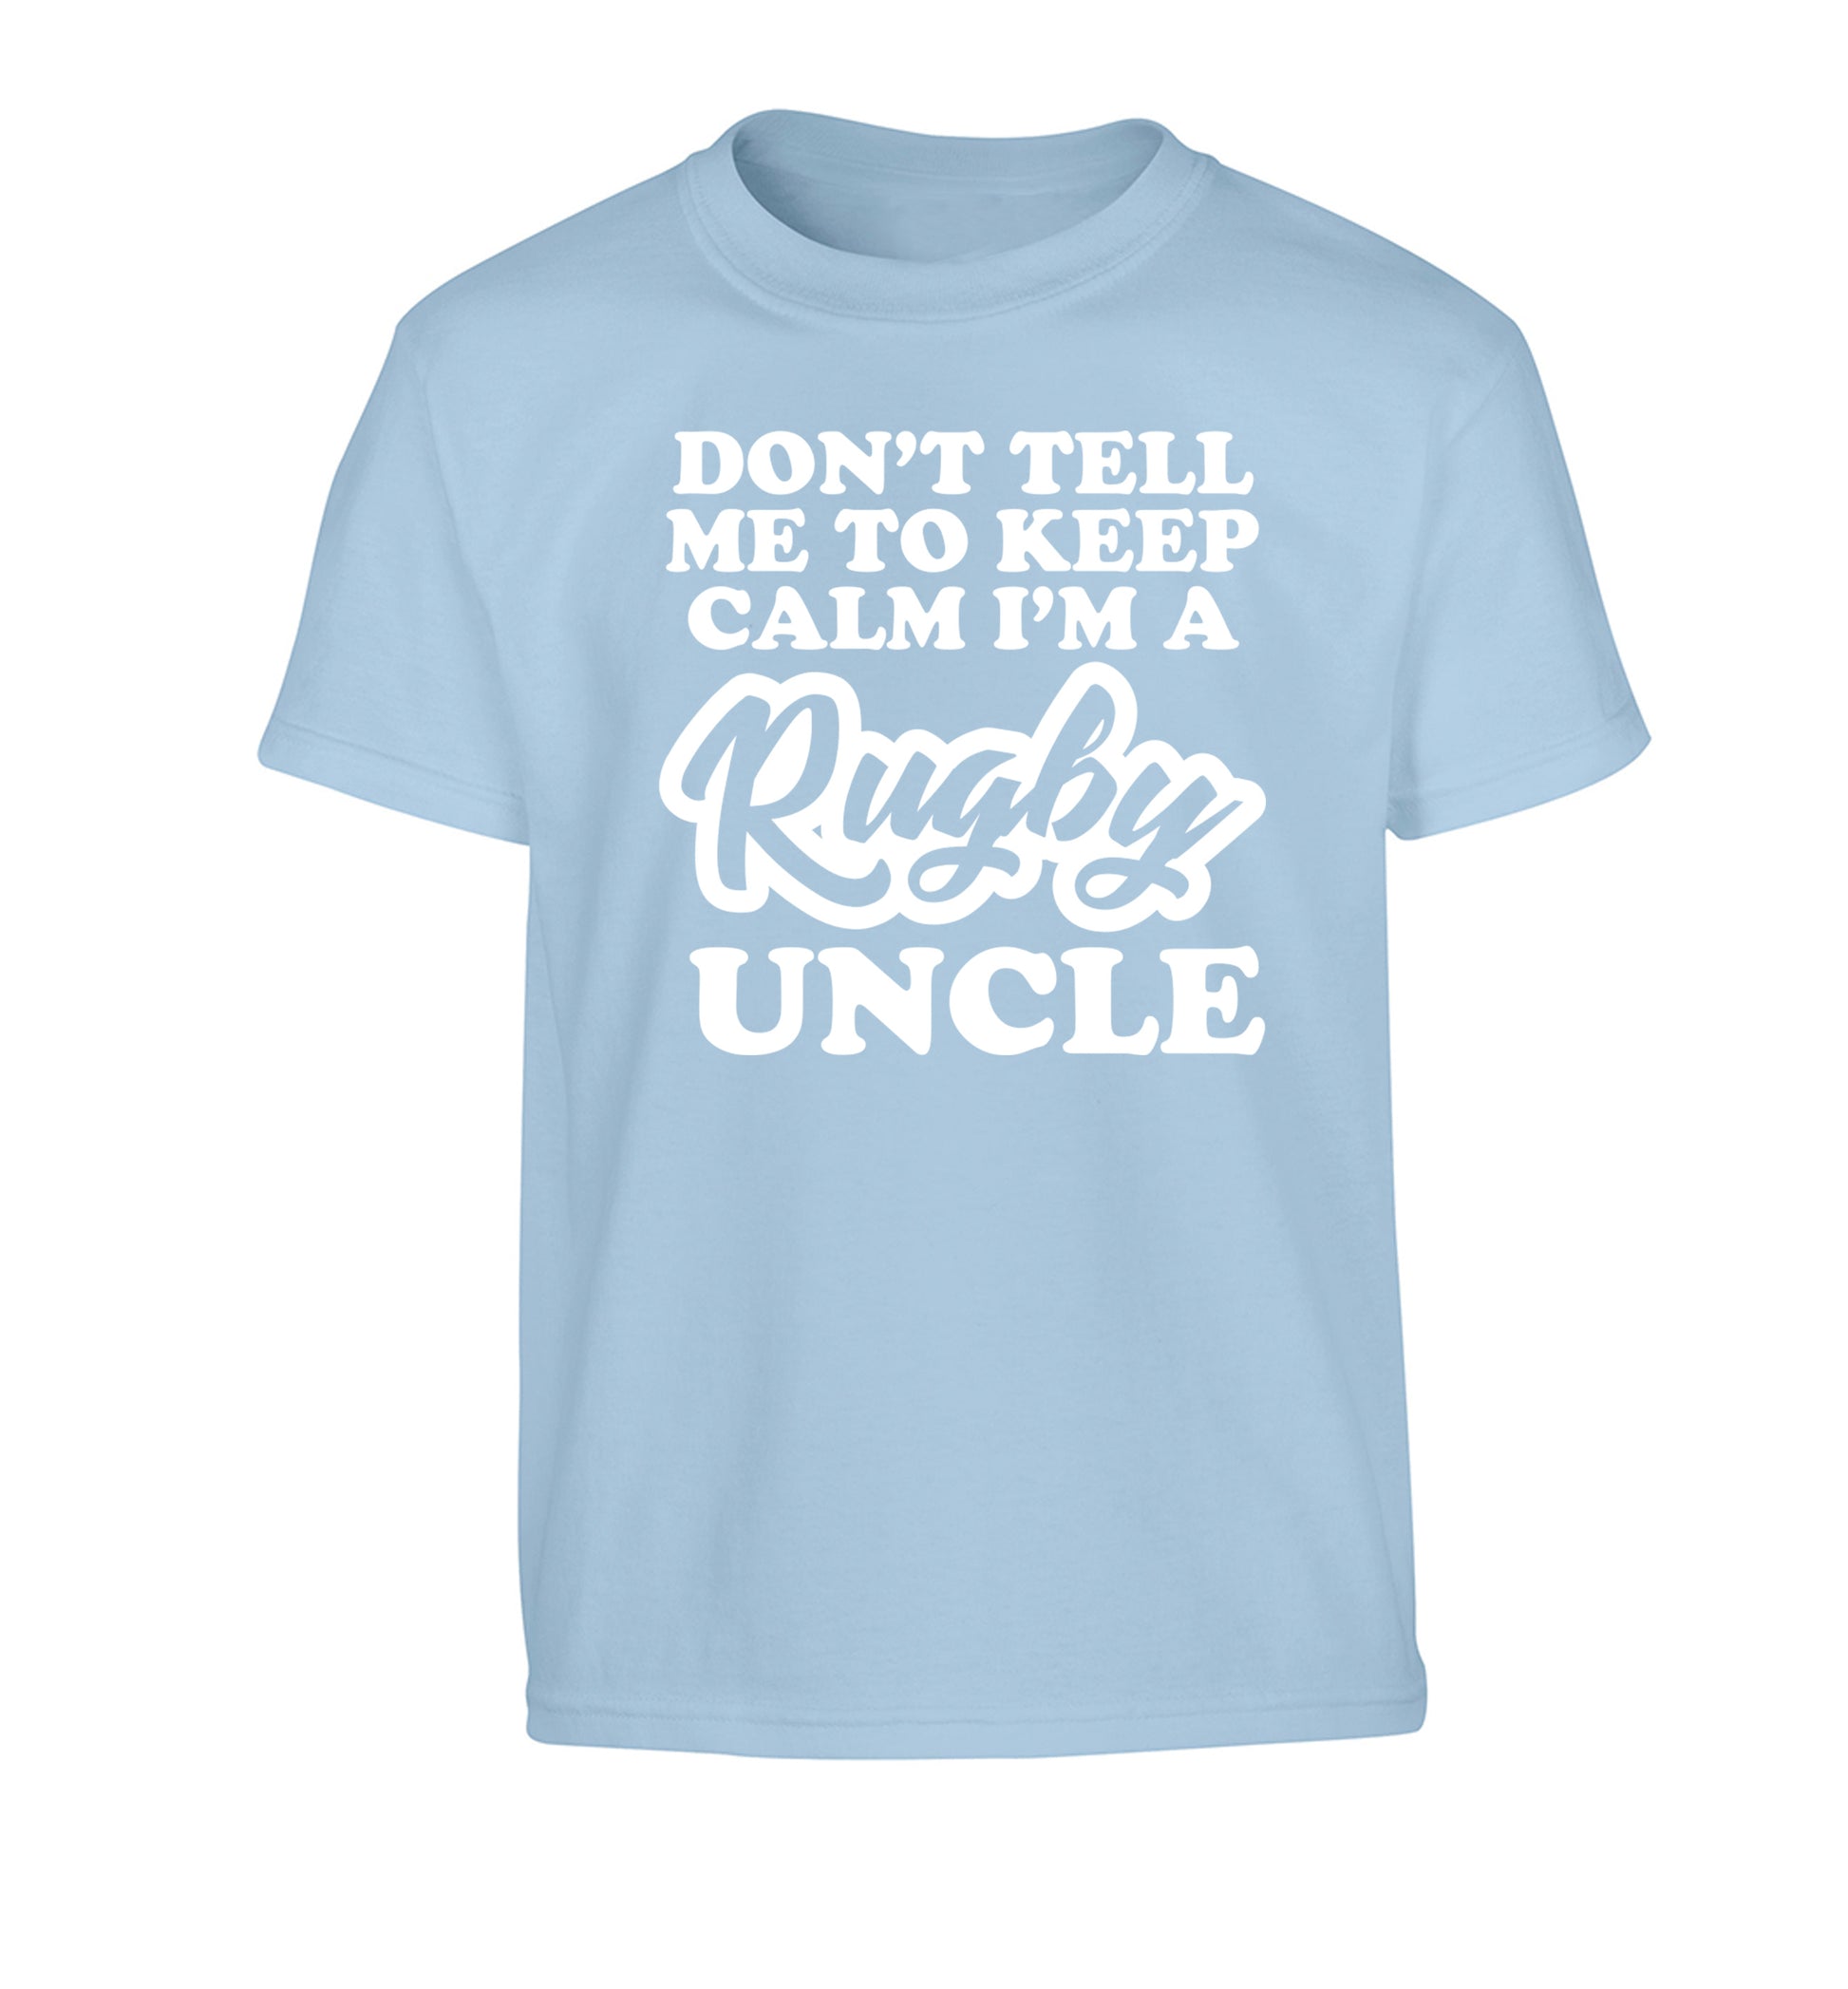 Don't tell me to keep calm I'm a rugby uncle Children's light blue Tshirt 12-13 Years